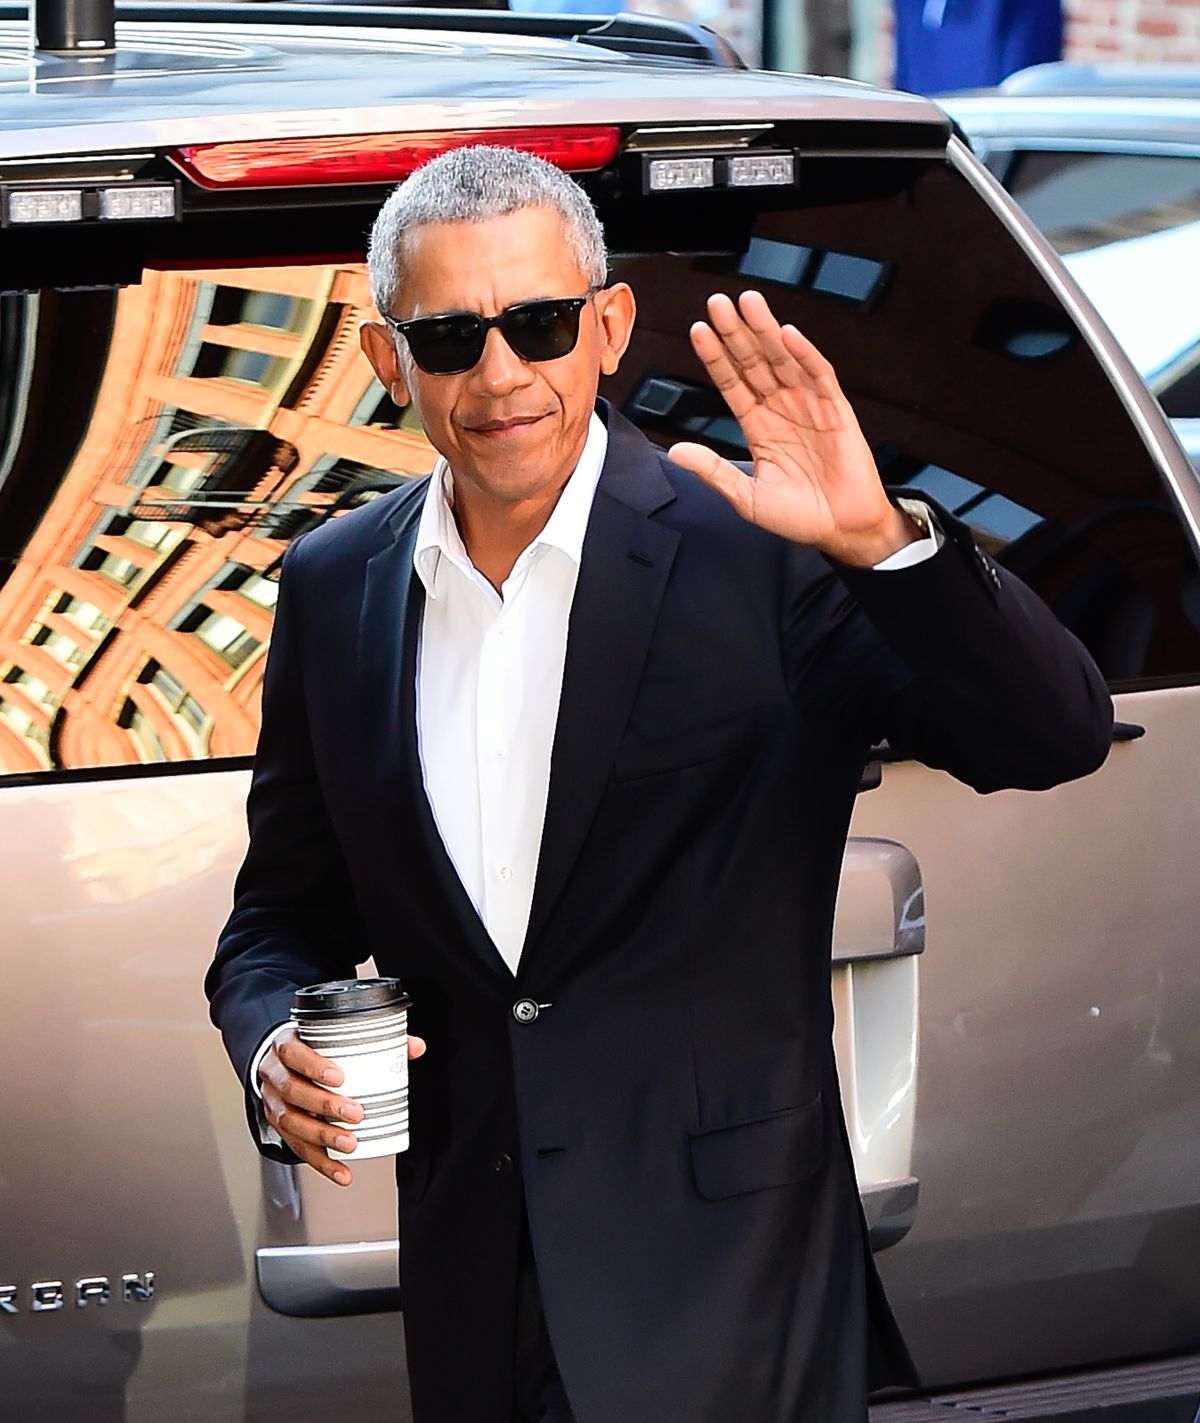 How to Look as Unbelievably Cool as Obama in Sunglasses